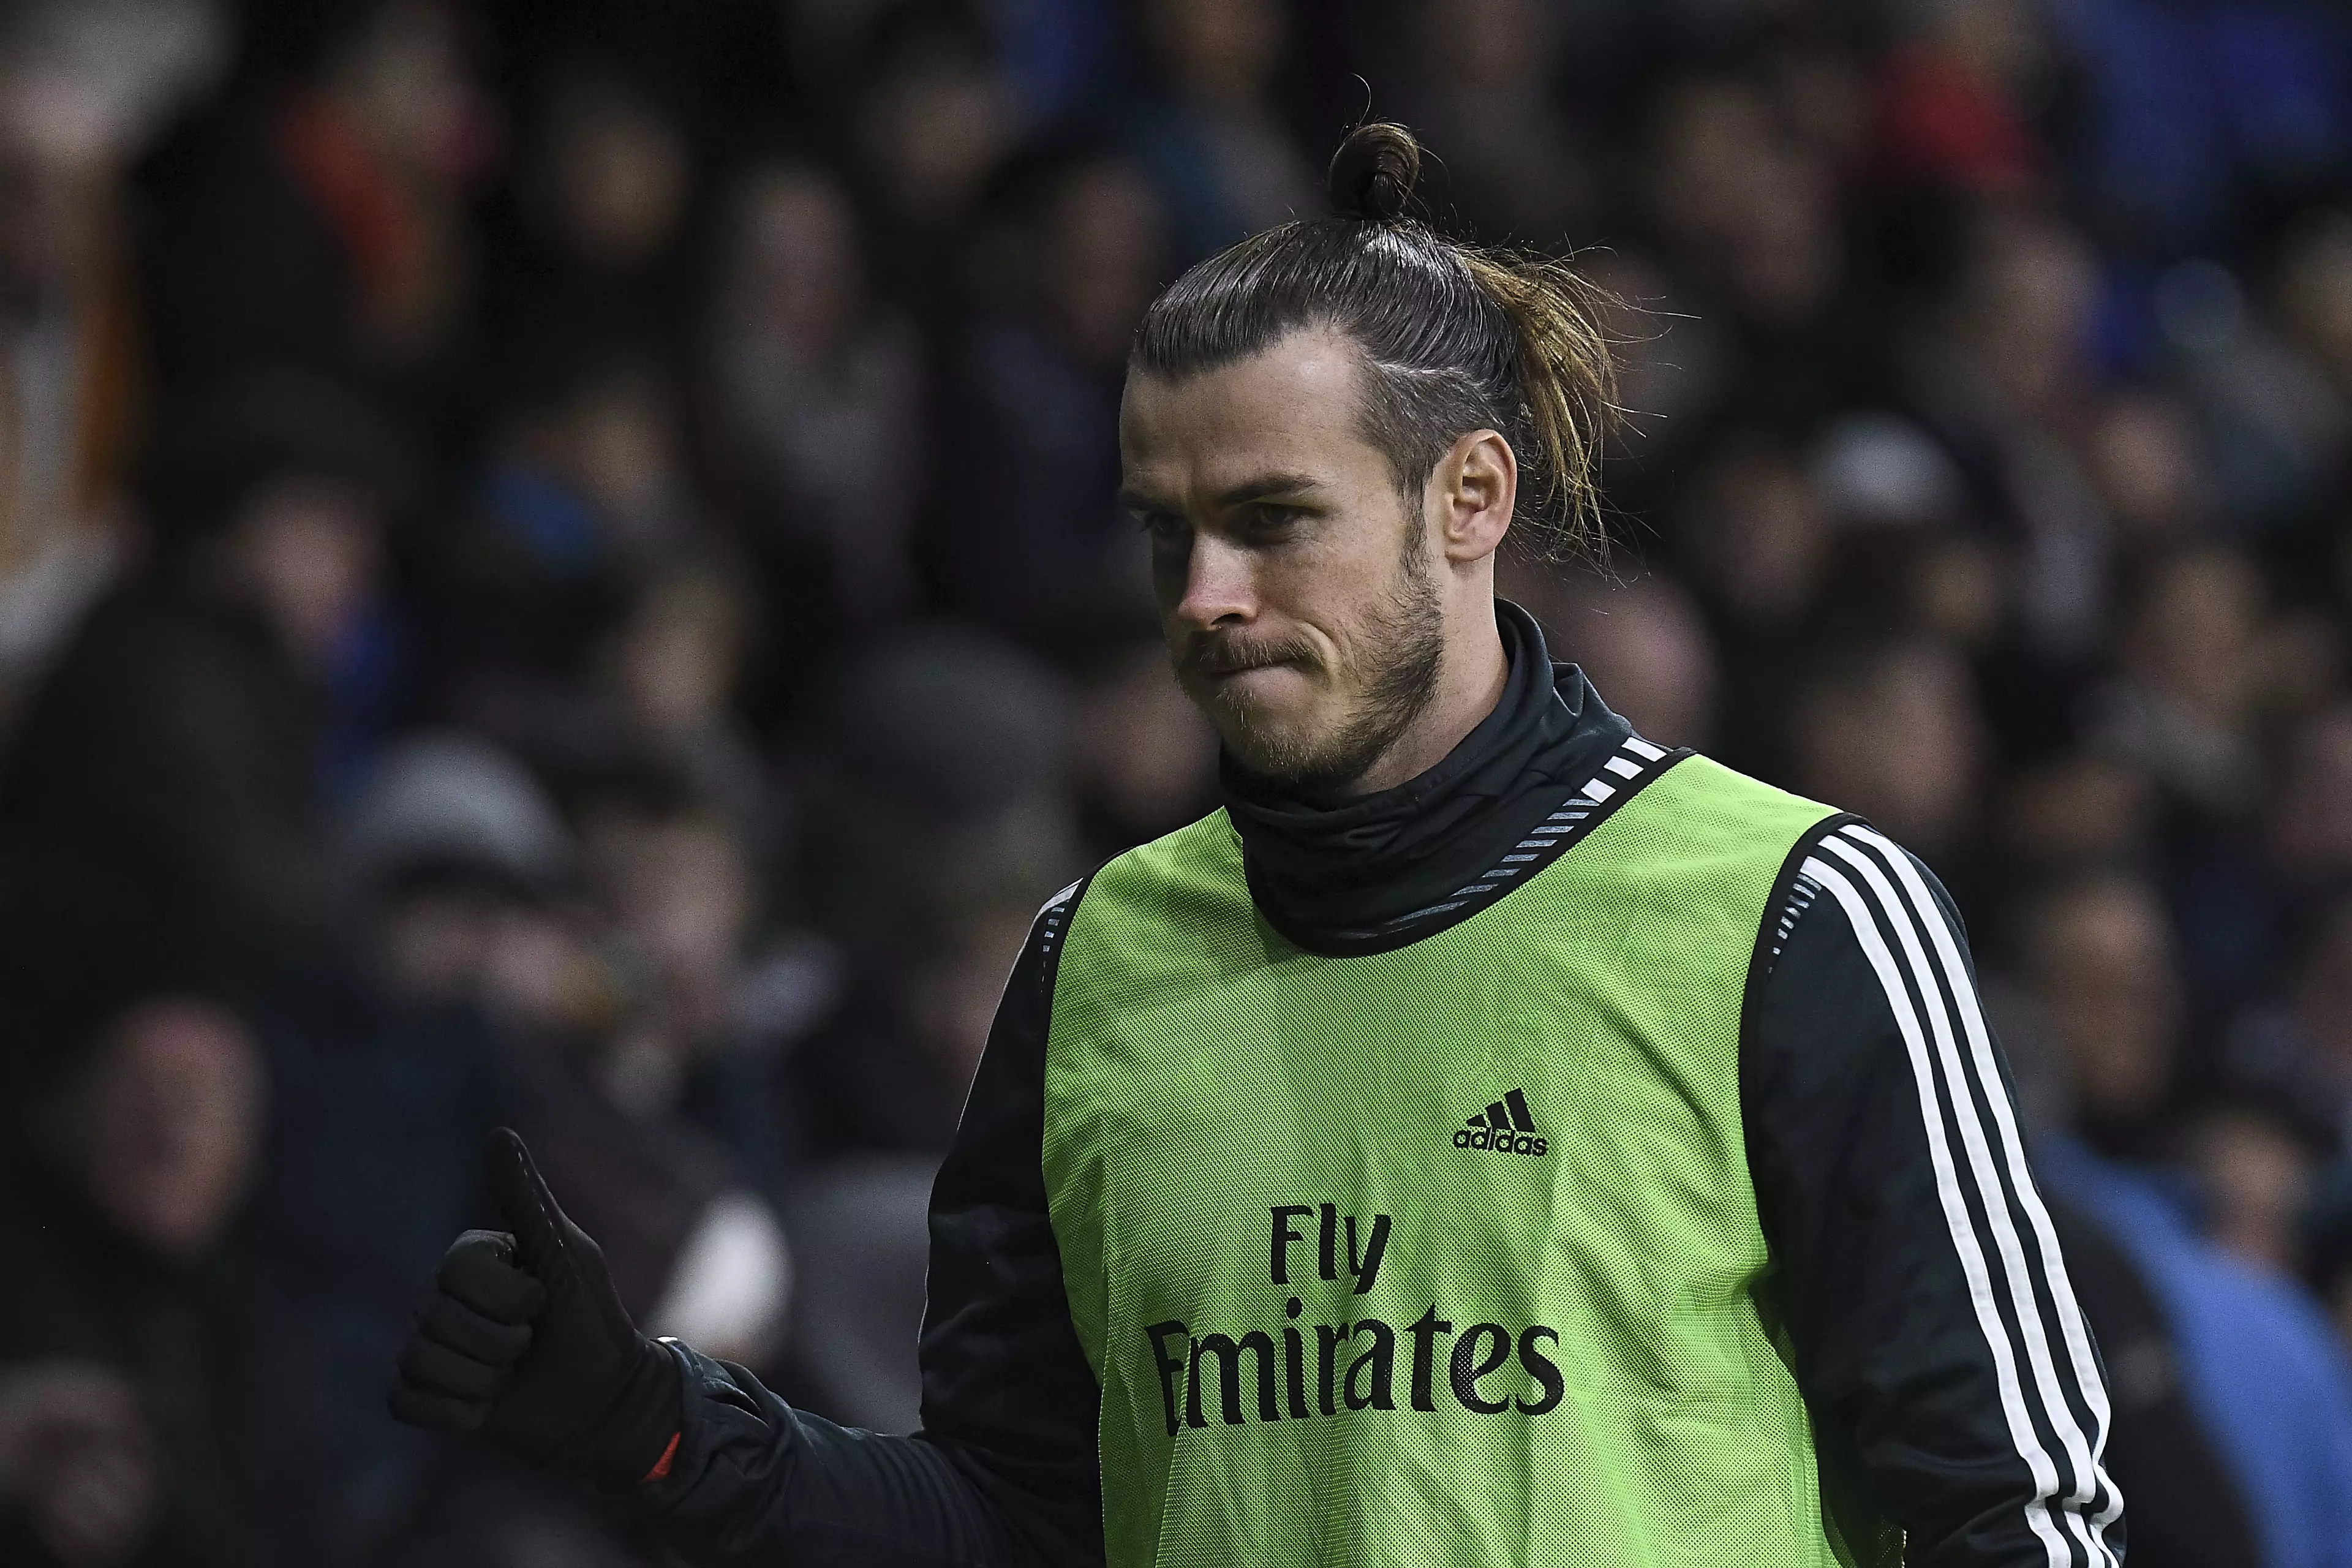 Bale has never been loved at Real. Image: PA Images